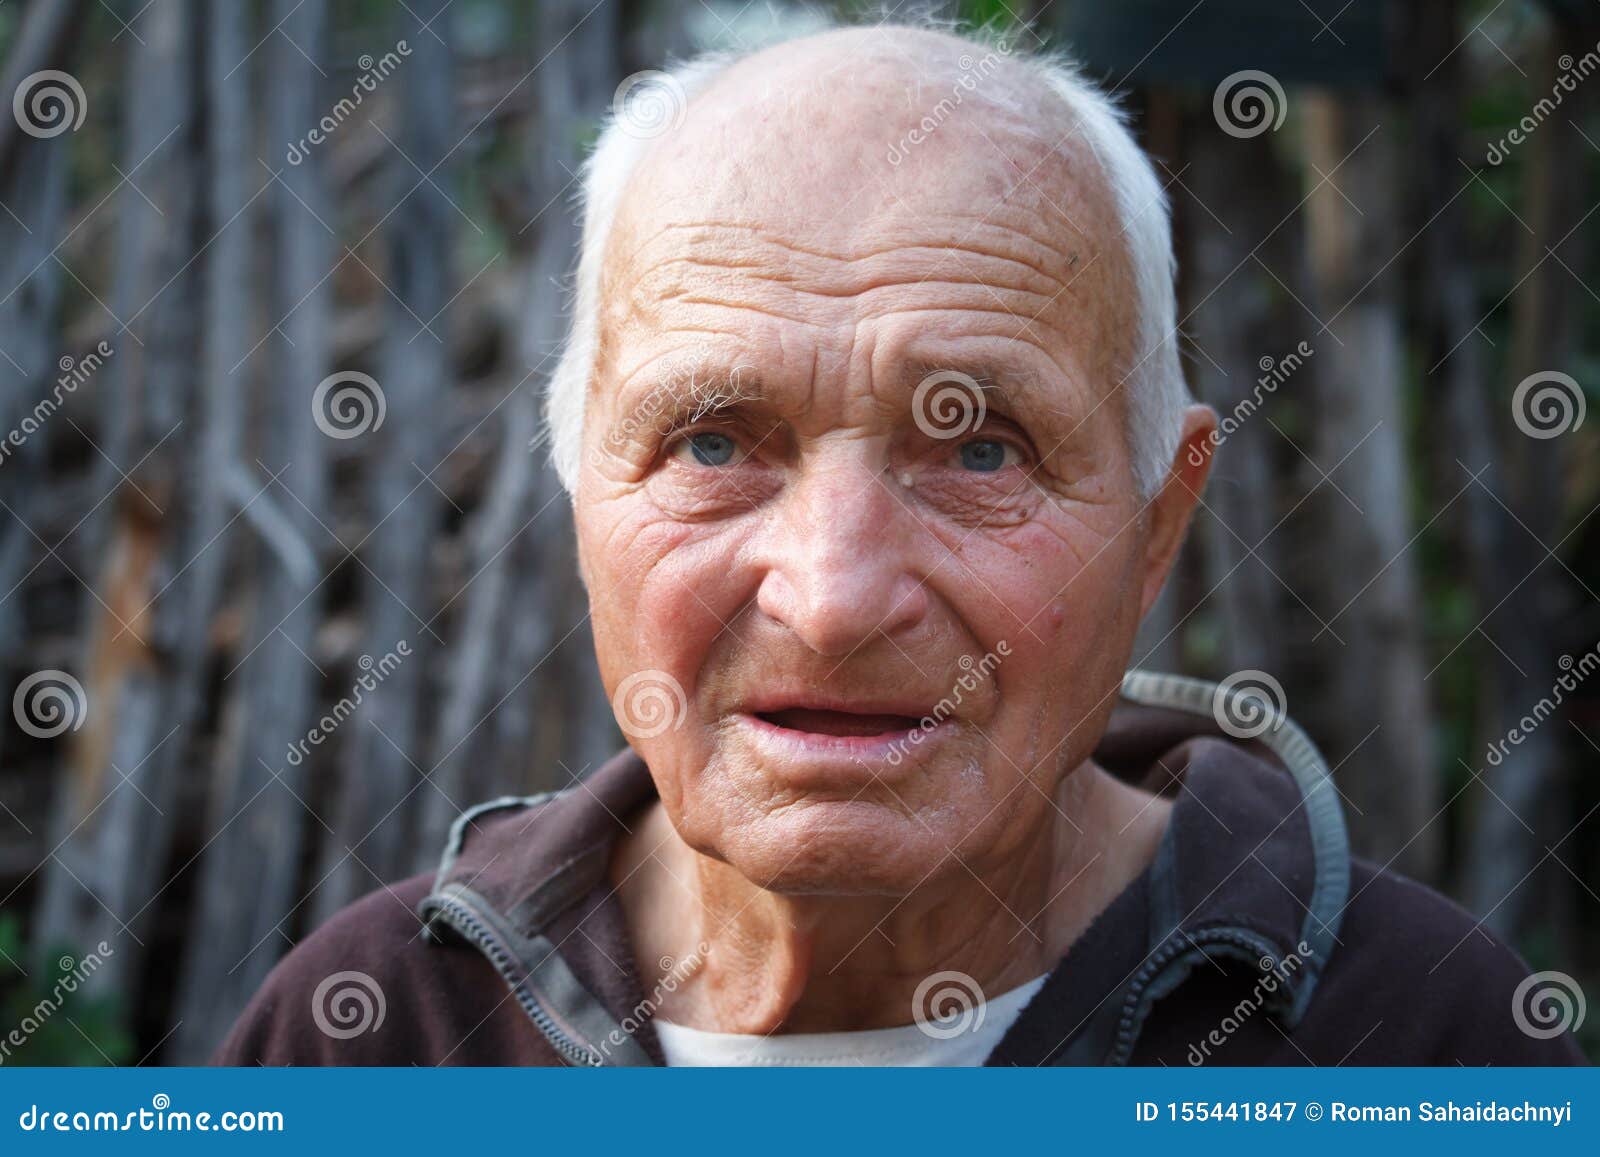 close-up portrait of a very old man against the background of wattle, selective focus